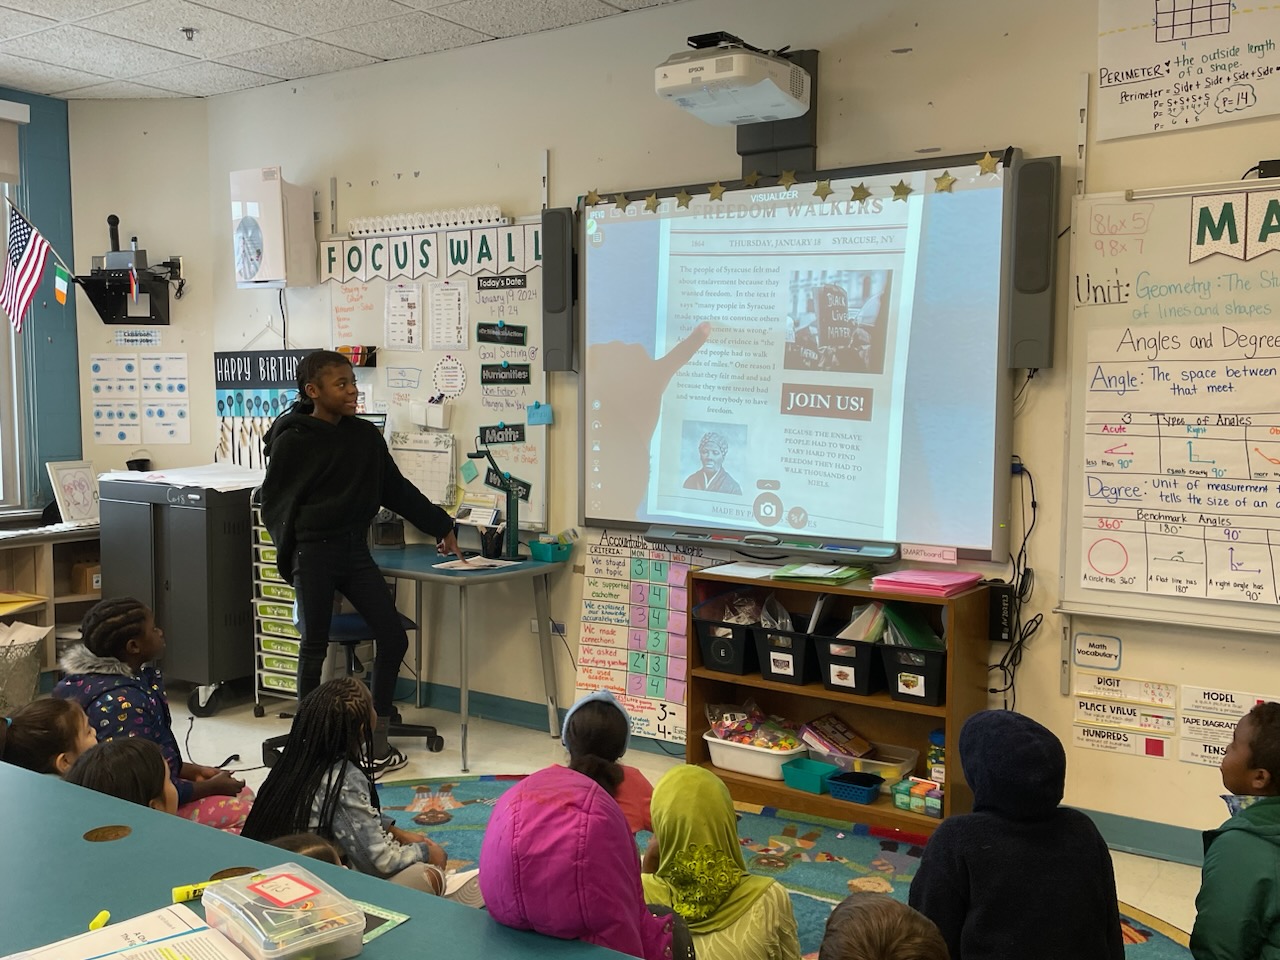 This is a photo of a Dr. Weeks 4th grade student standing in front of her class, pointing to her project displayed on the smart board in front of her.